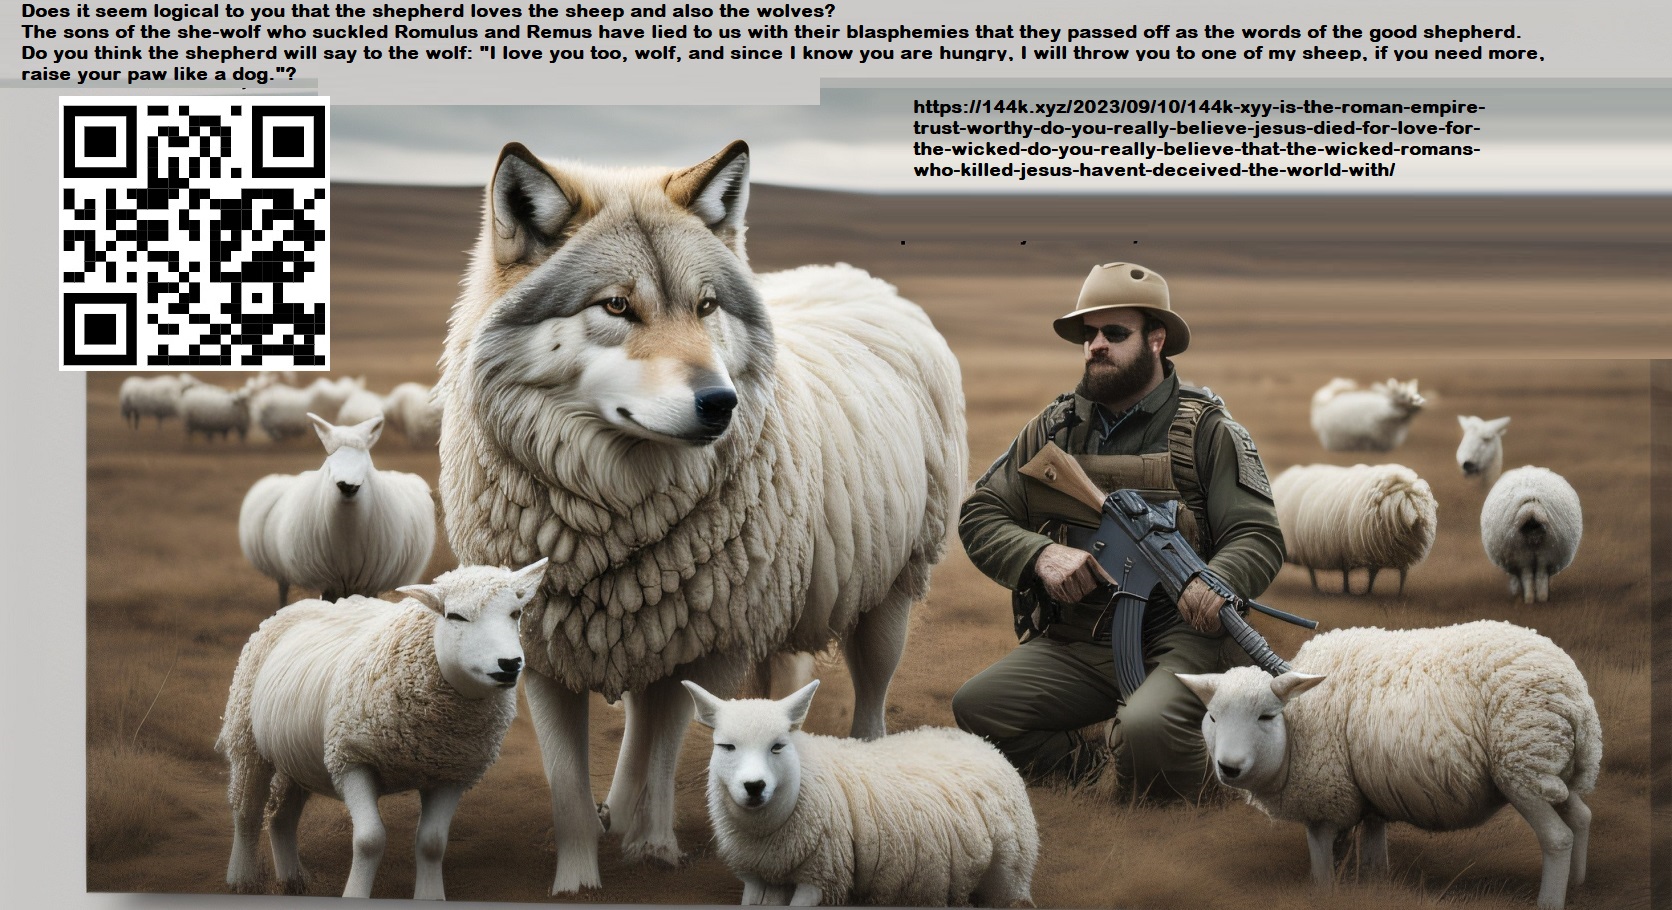 WOLF AND SHEEP ARE DIFFERENT THE SHEPHERTS HUNTS THE WOLFS TO PROTECT THE SHEEP